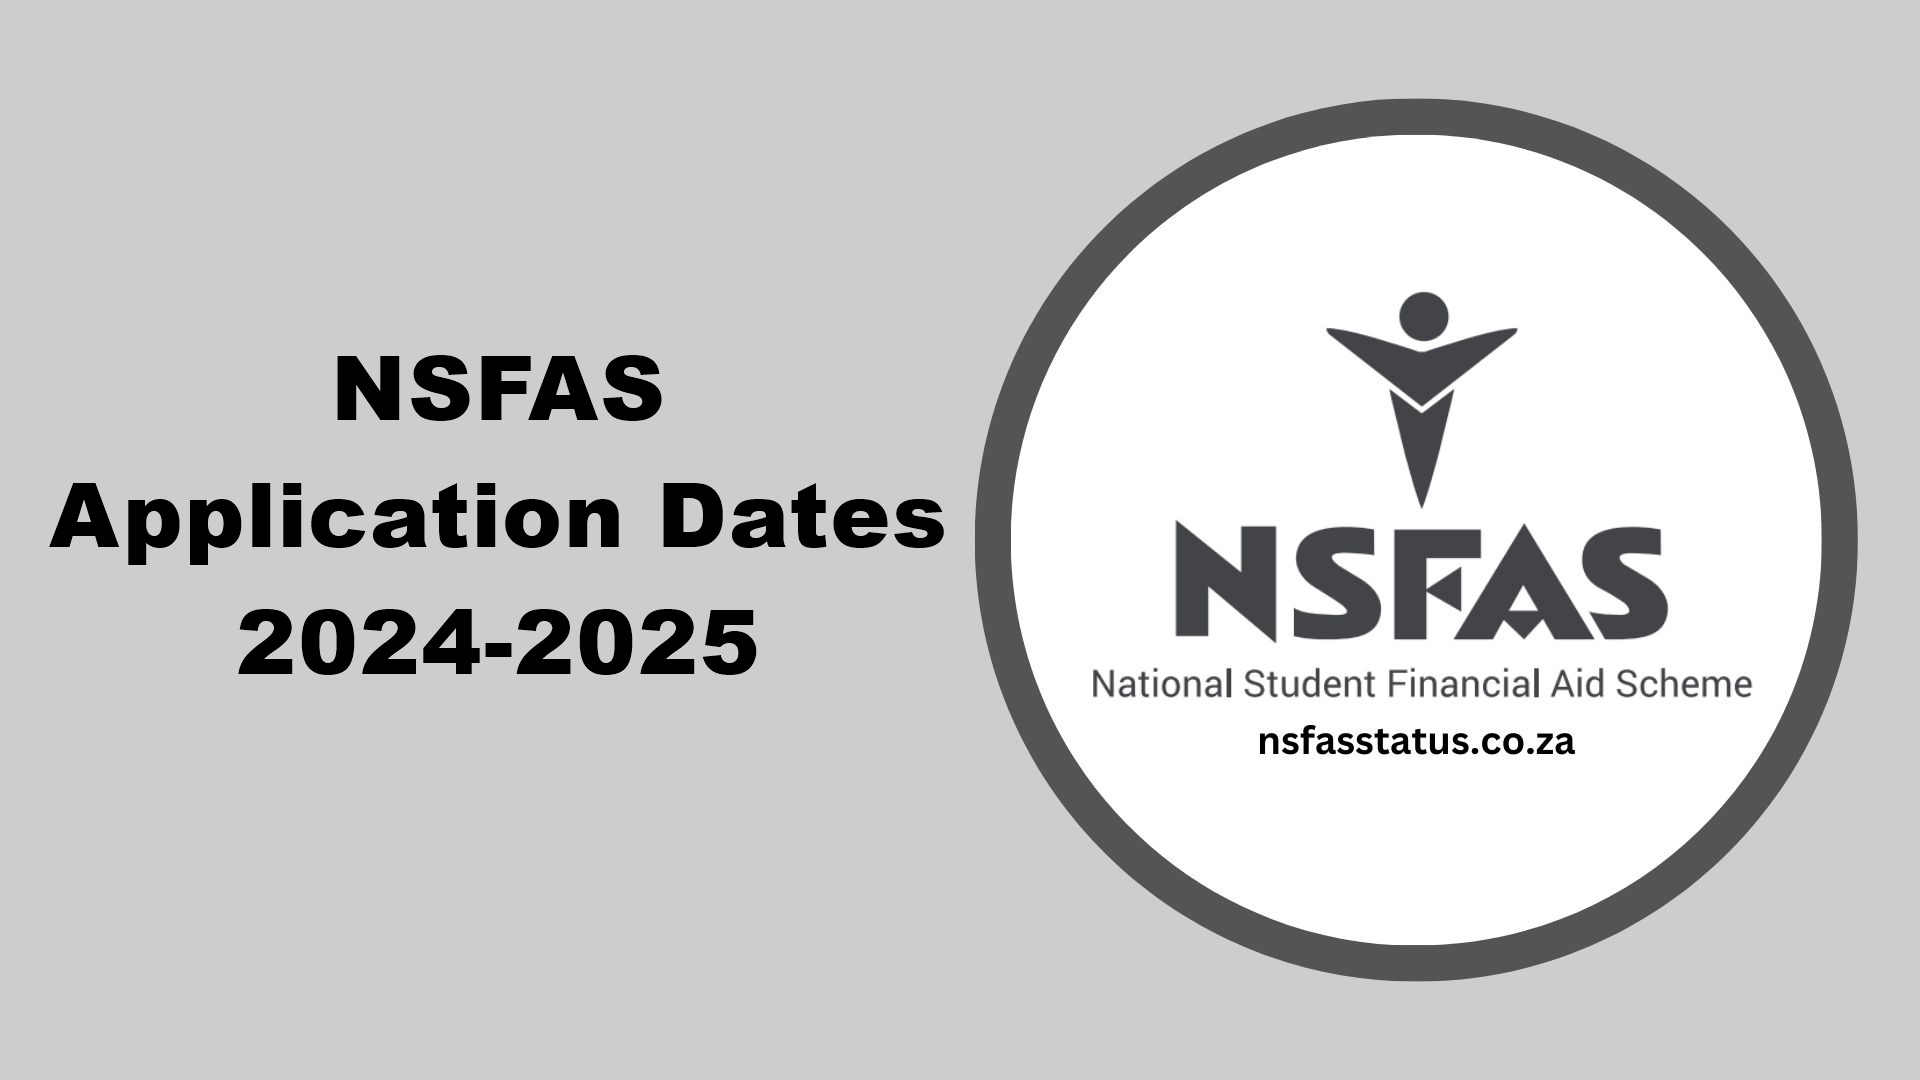 NSFAS Application Opening Date